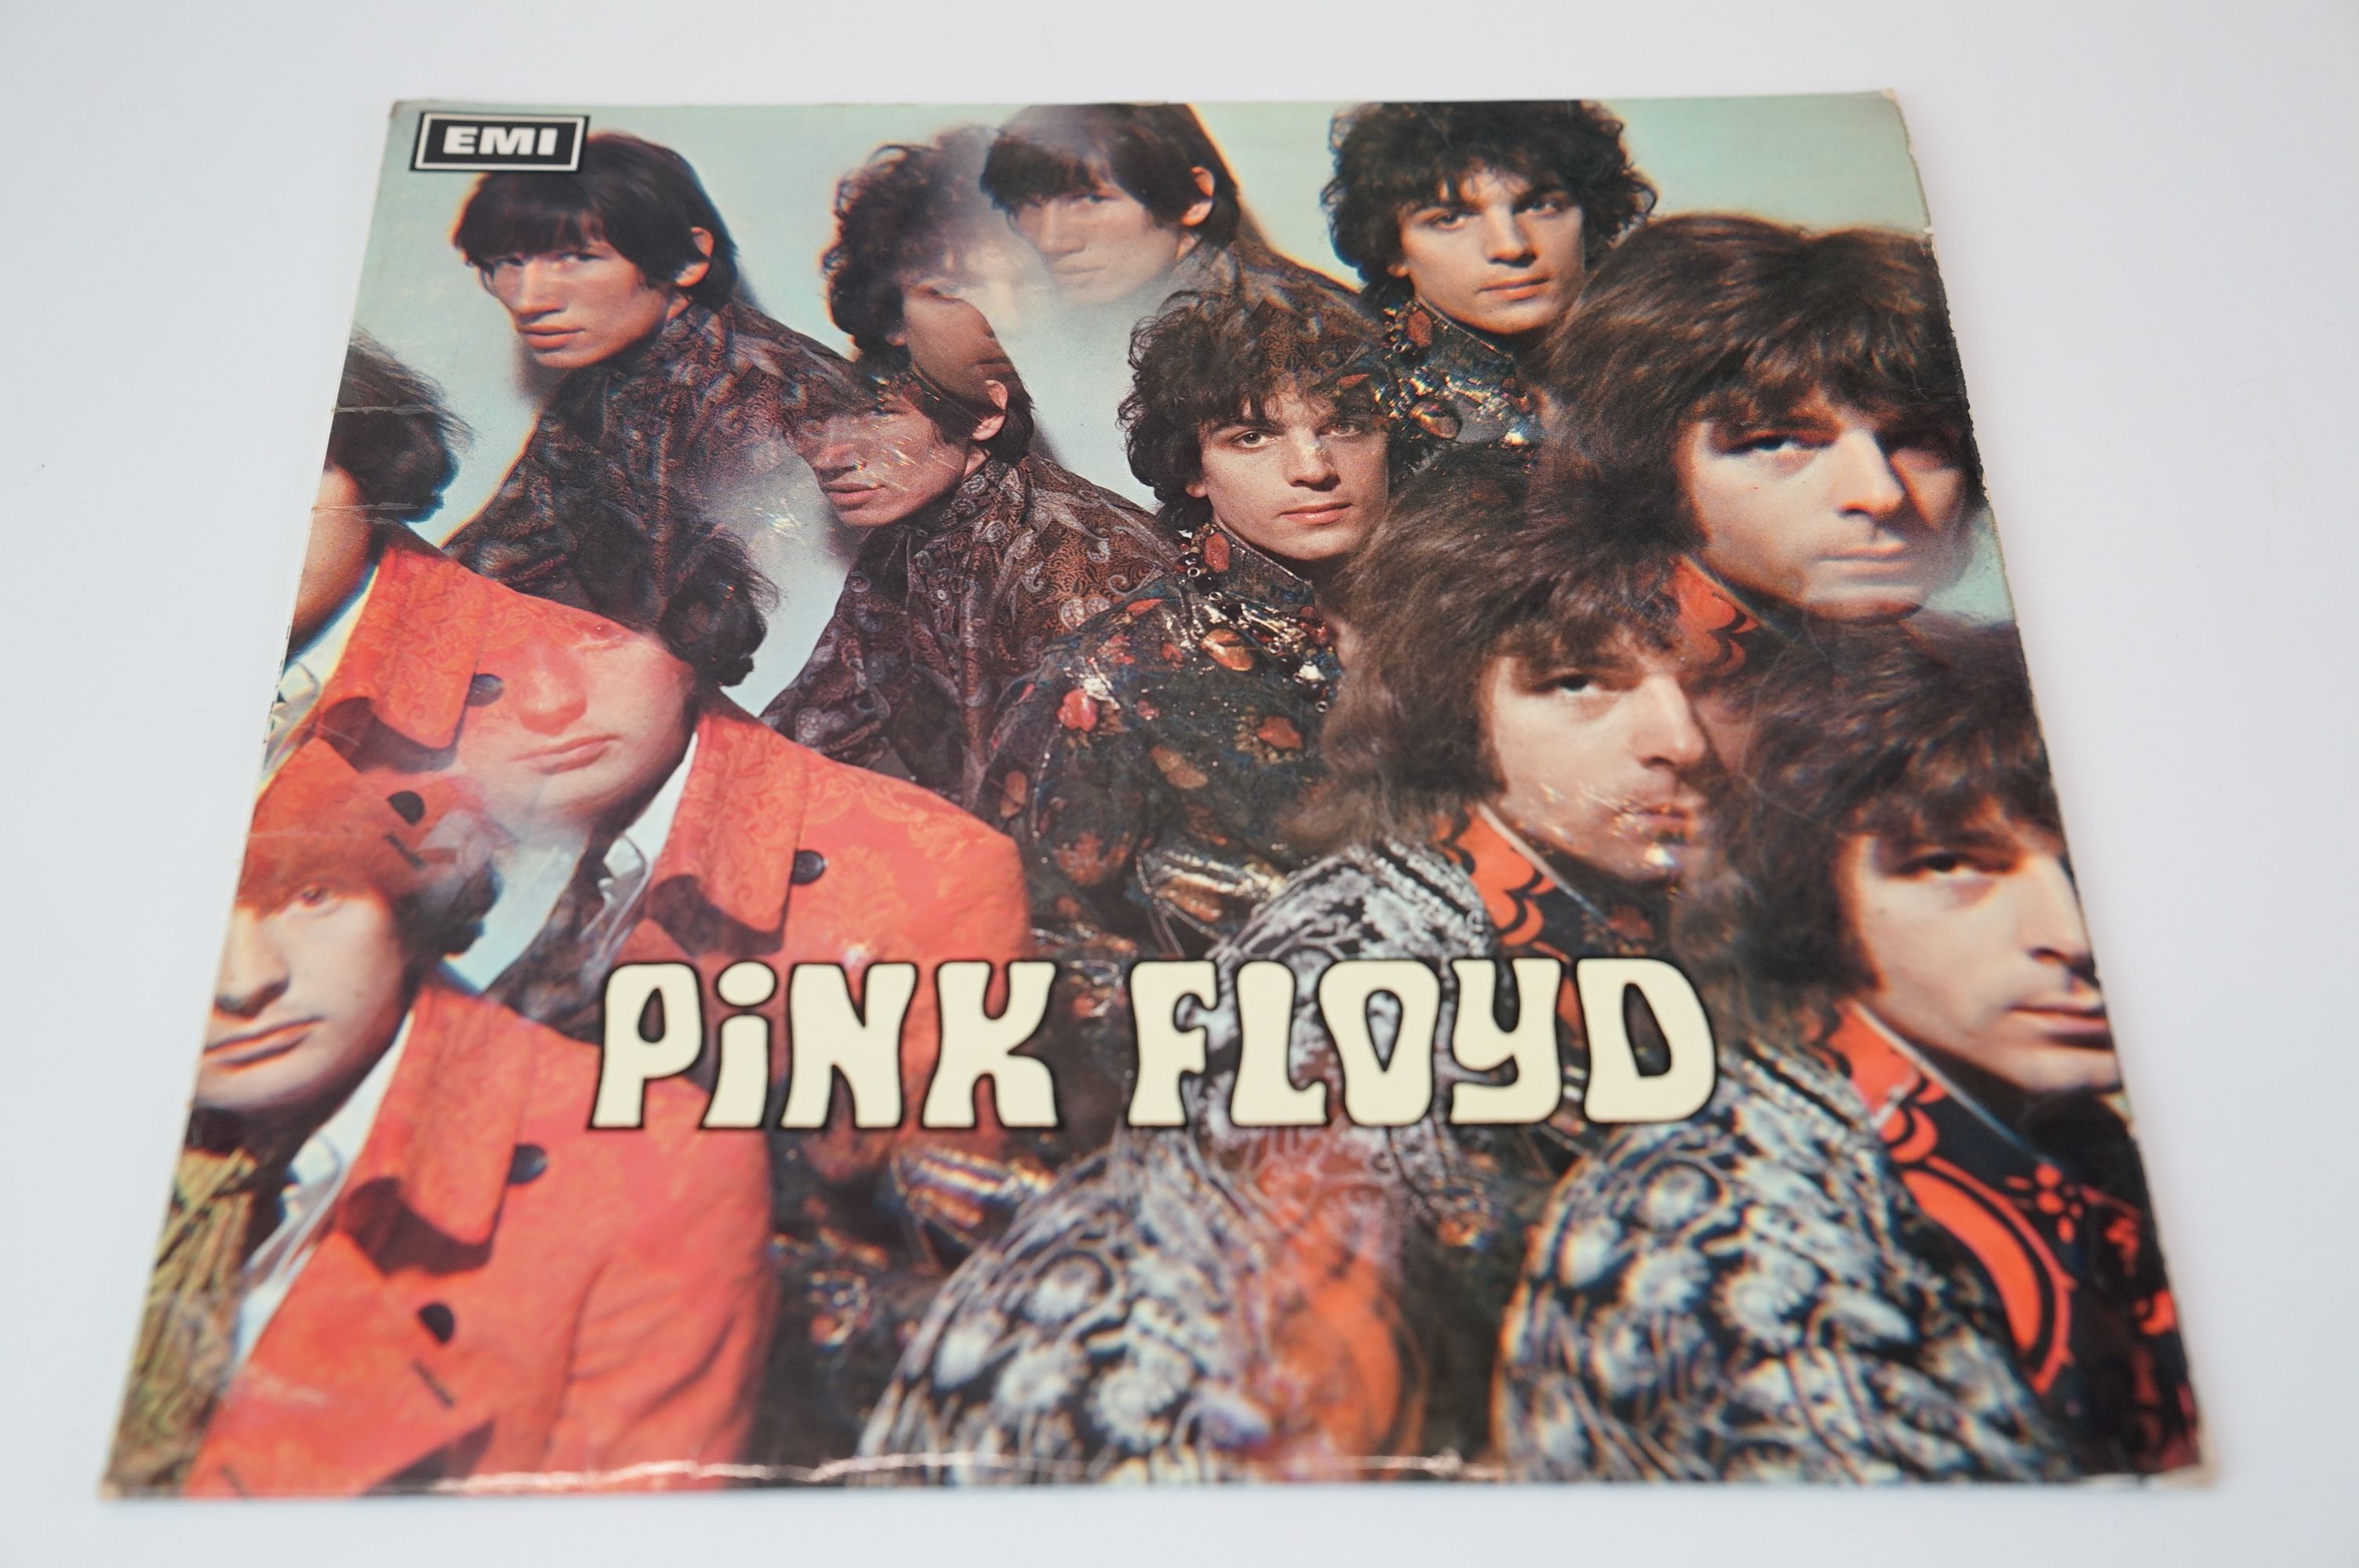 Vinyl - Pink Floyd The Piper at the Gates of Dawn LP on Columbia SX6157, blue Columbia text to